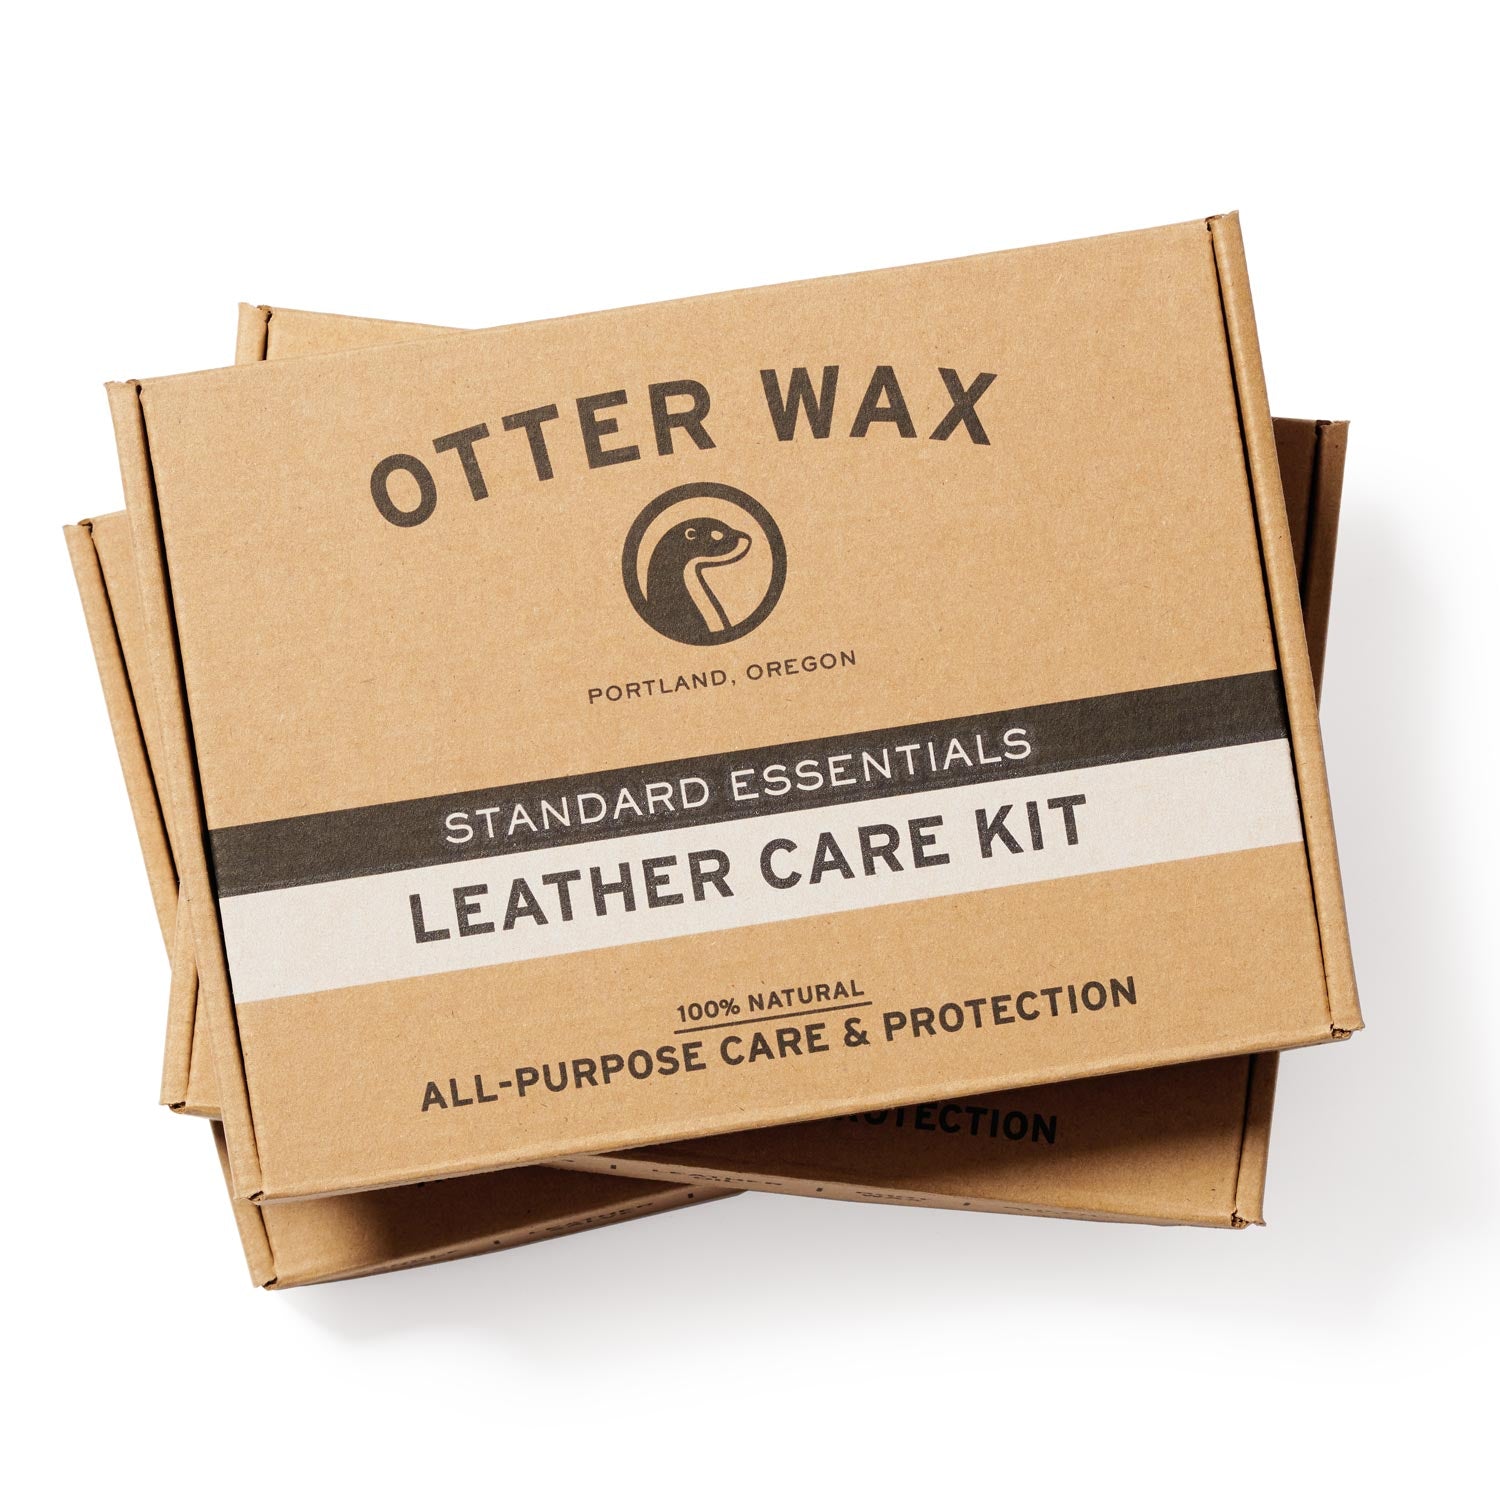 Otter Wax Leather Care Kit | Best Leather Care Products To Condition Clean And Waterproof Leather Boots Jackets Furniture Bags And More